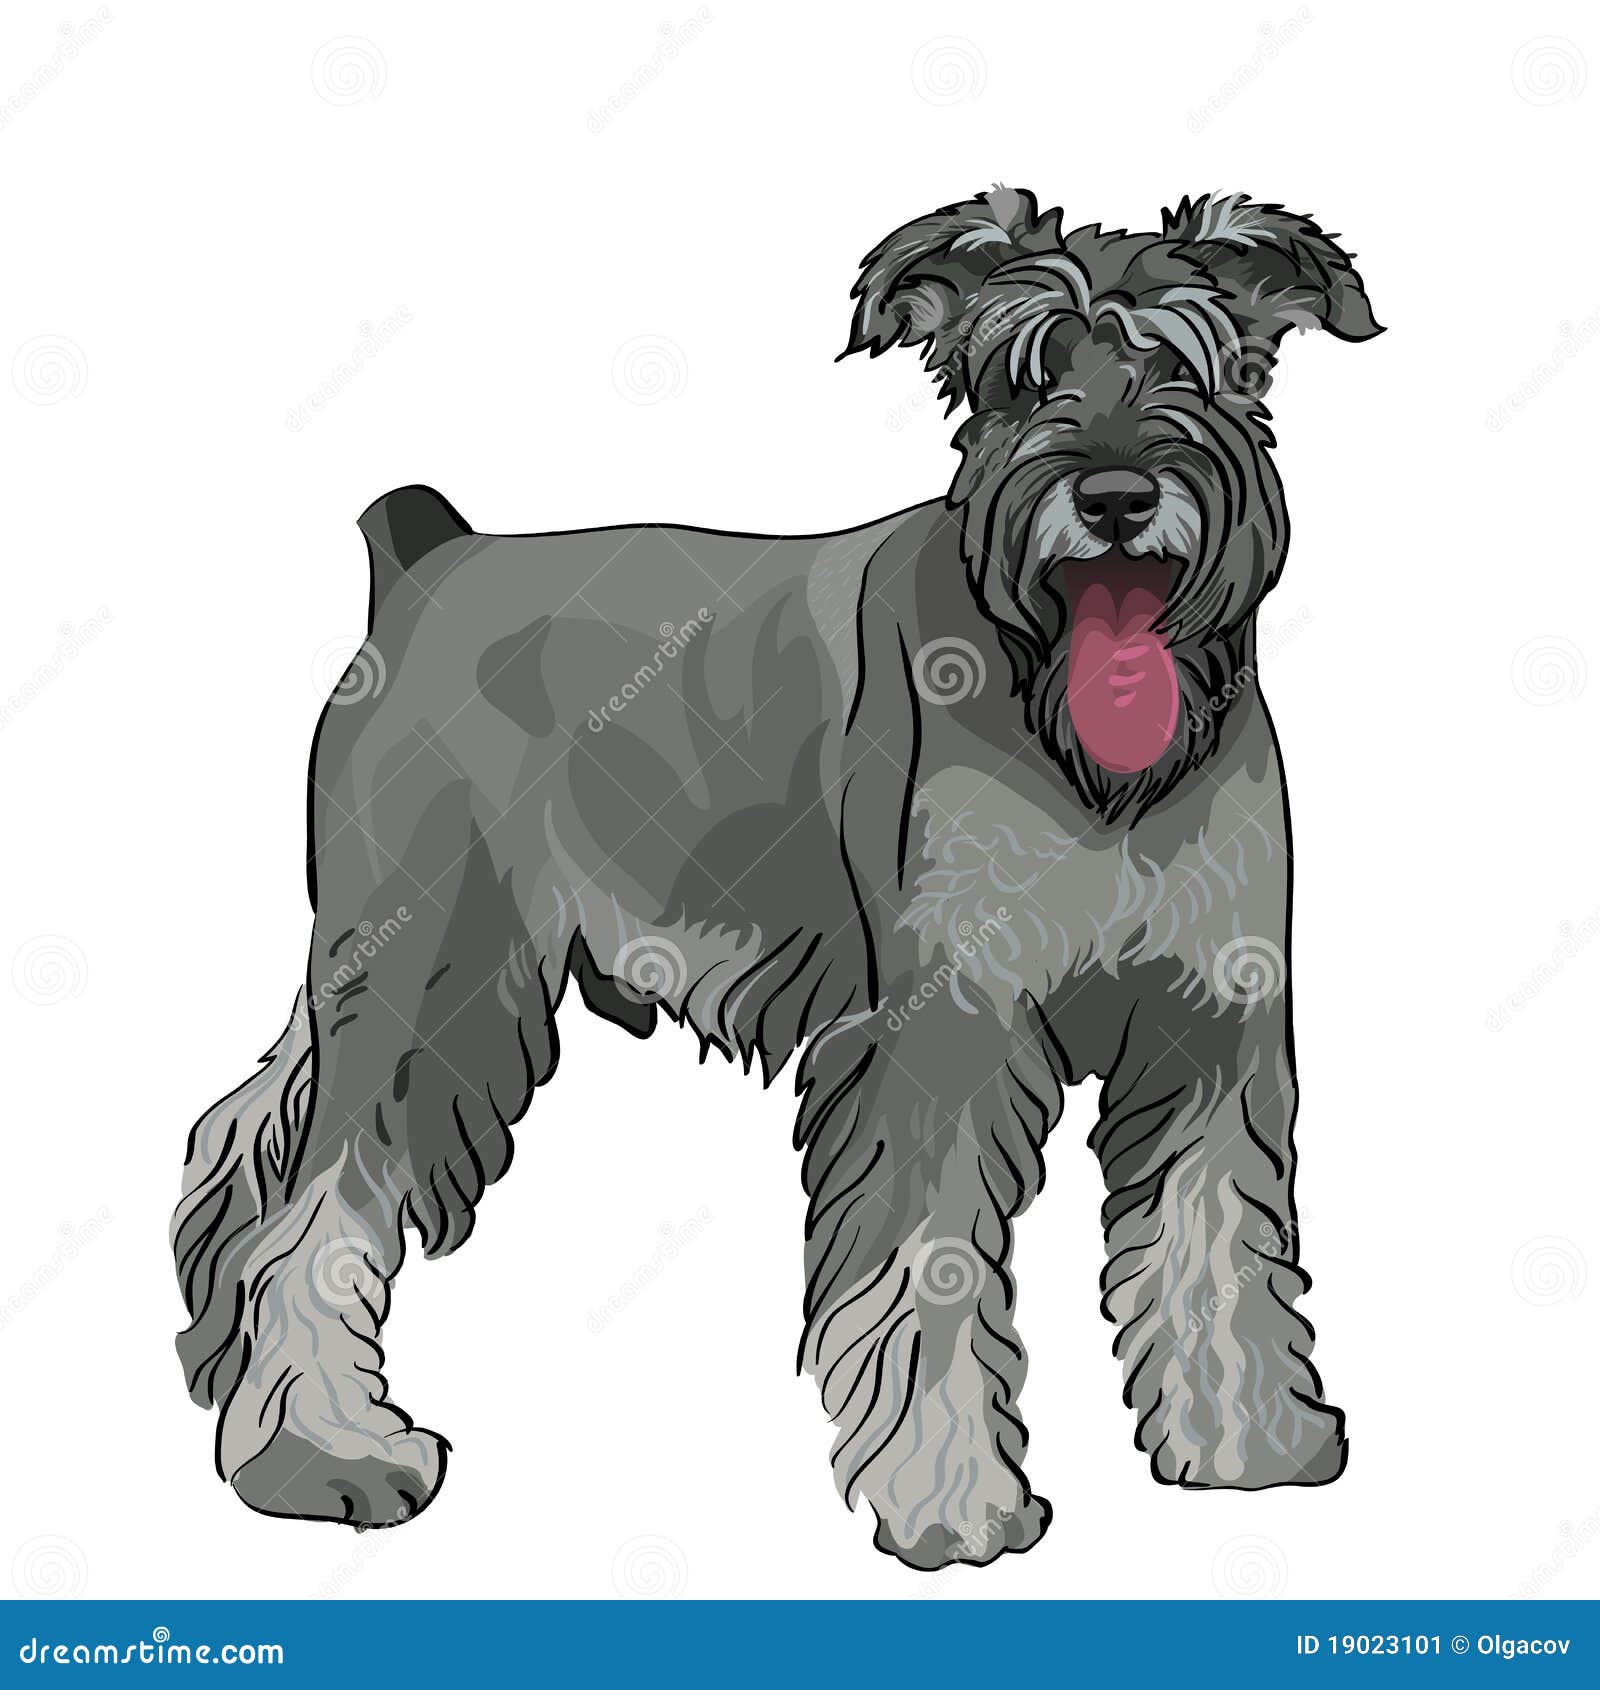  schnauzer dog with his tongue hanging out